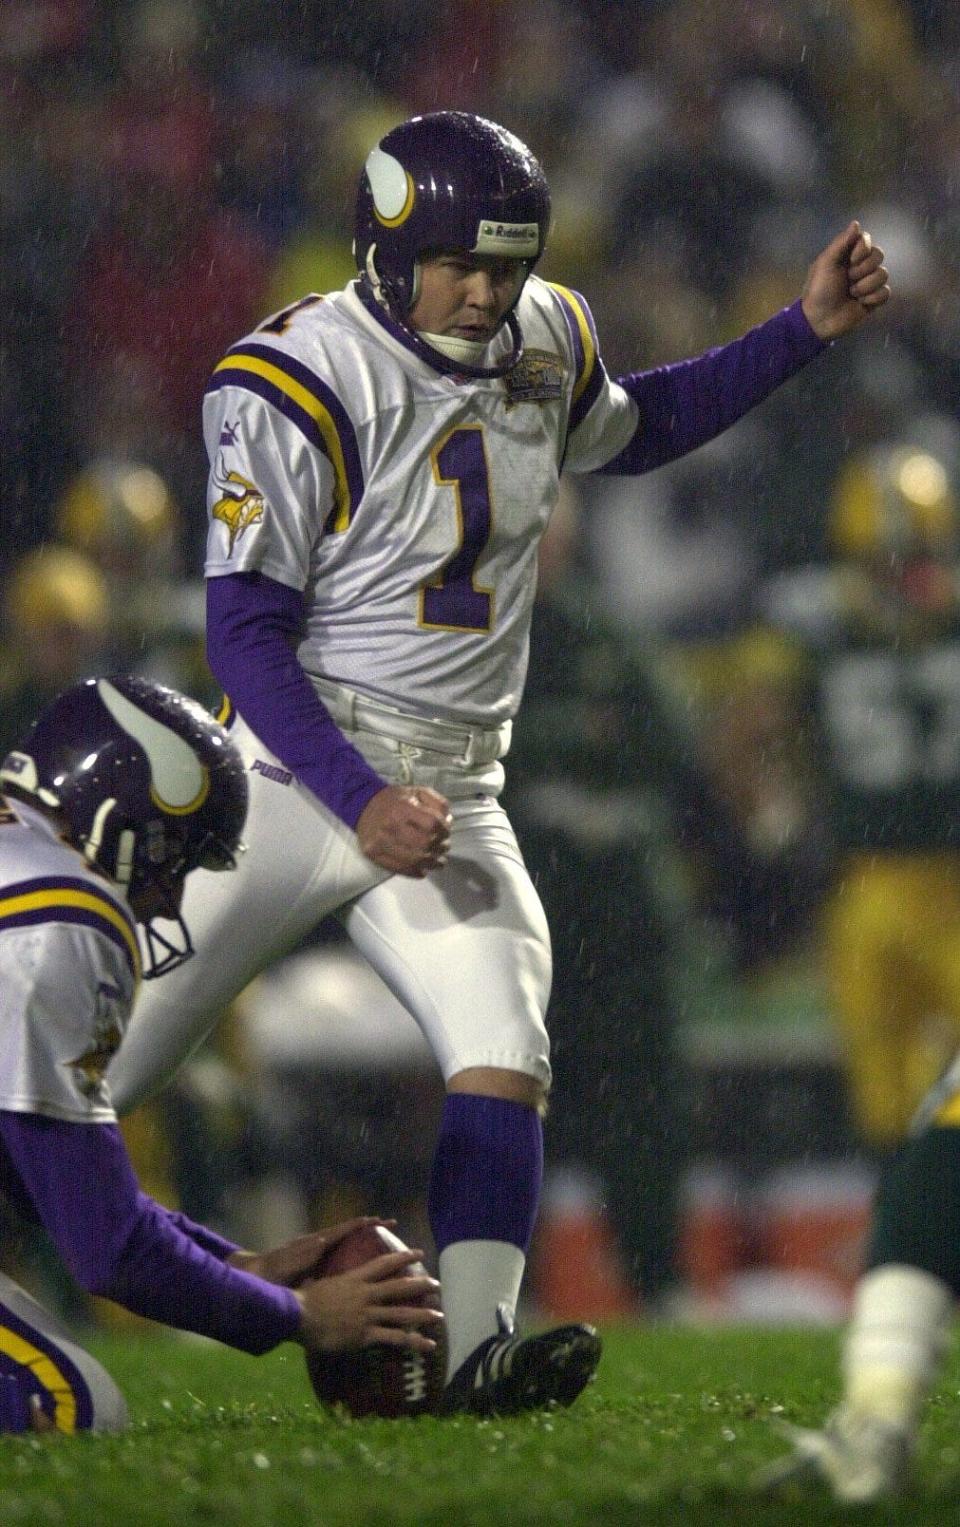 Minnesota Vikings kicker Gary Anderson can't kick a poorly placed ball on a field goal attempt with 8 seconds left in the game.